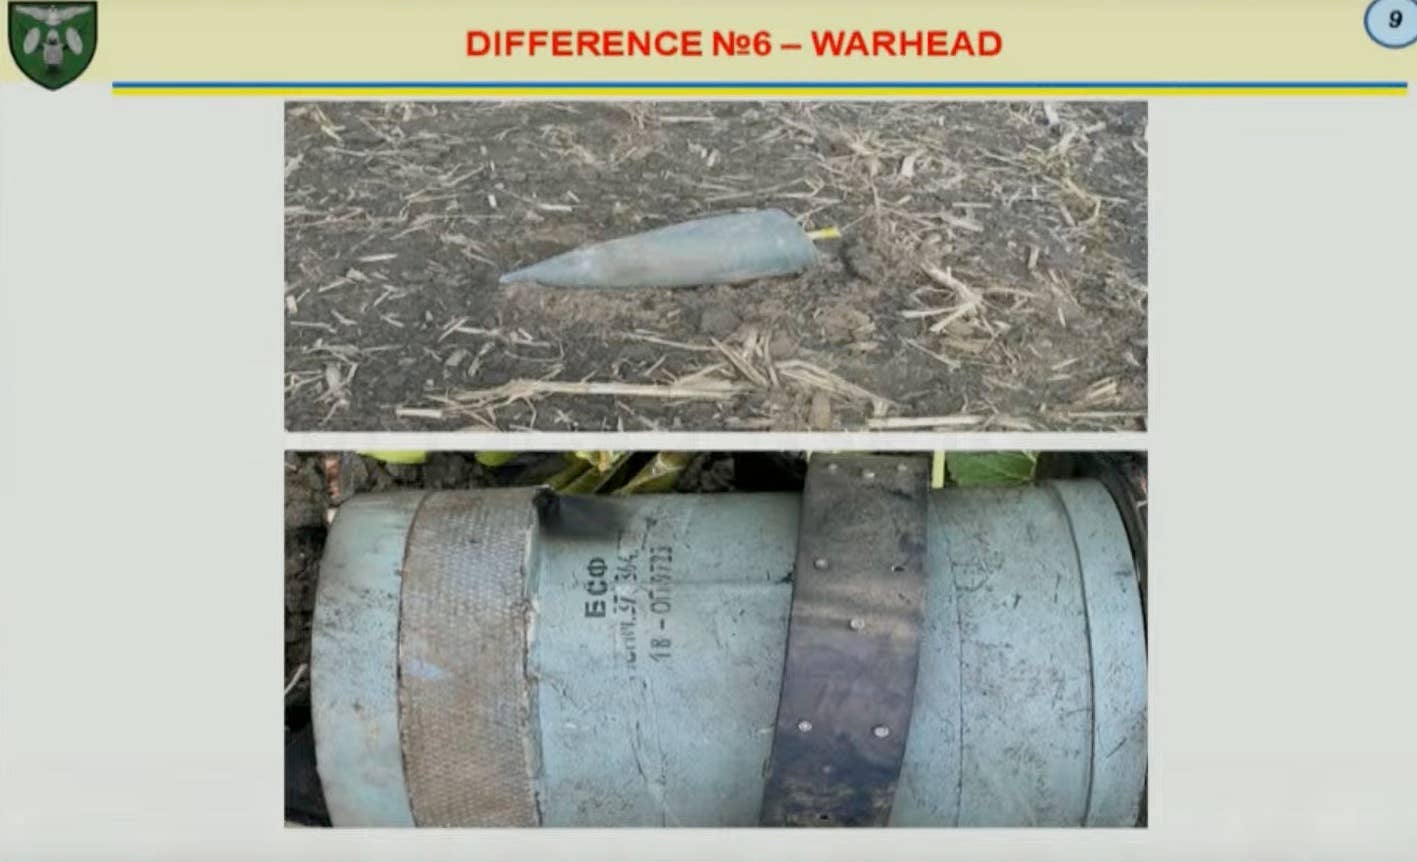 The new Shahed-136 drones have a warhead packed with tungsten balls, according to Ukraine. (Ukrainian Military Media Center screencap)